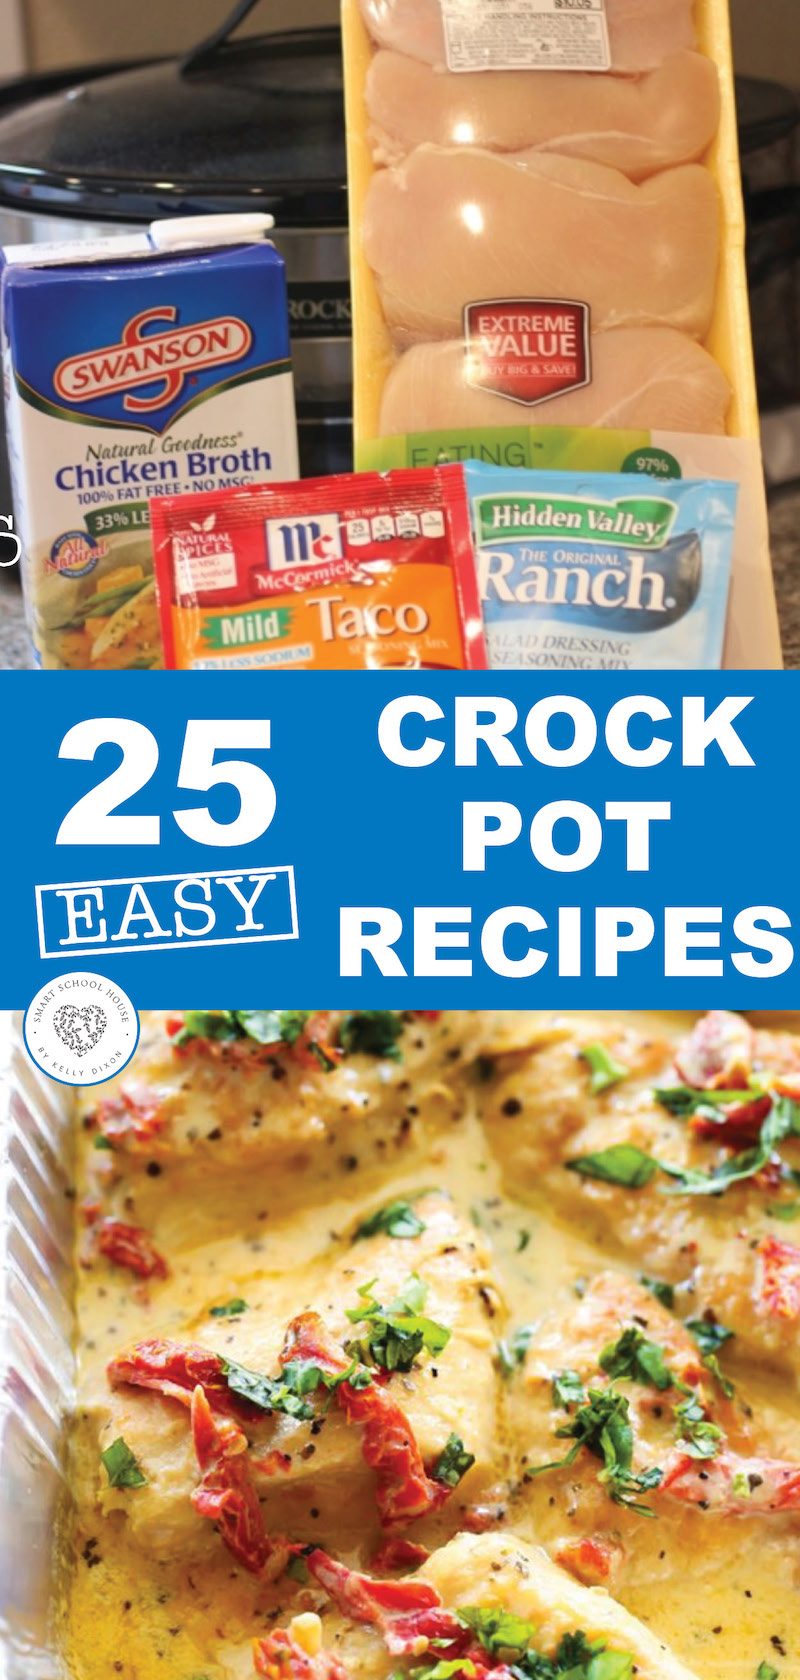 Find our top-rated collection of crock pot recipes for chicken, pork, sandwich fillings, pot roasts, chili, stews, main dishes, sides, desserts and more. 